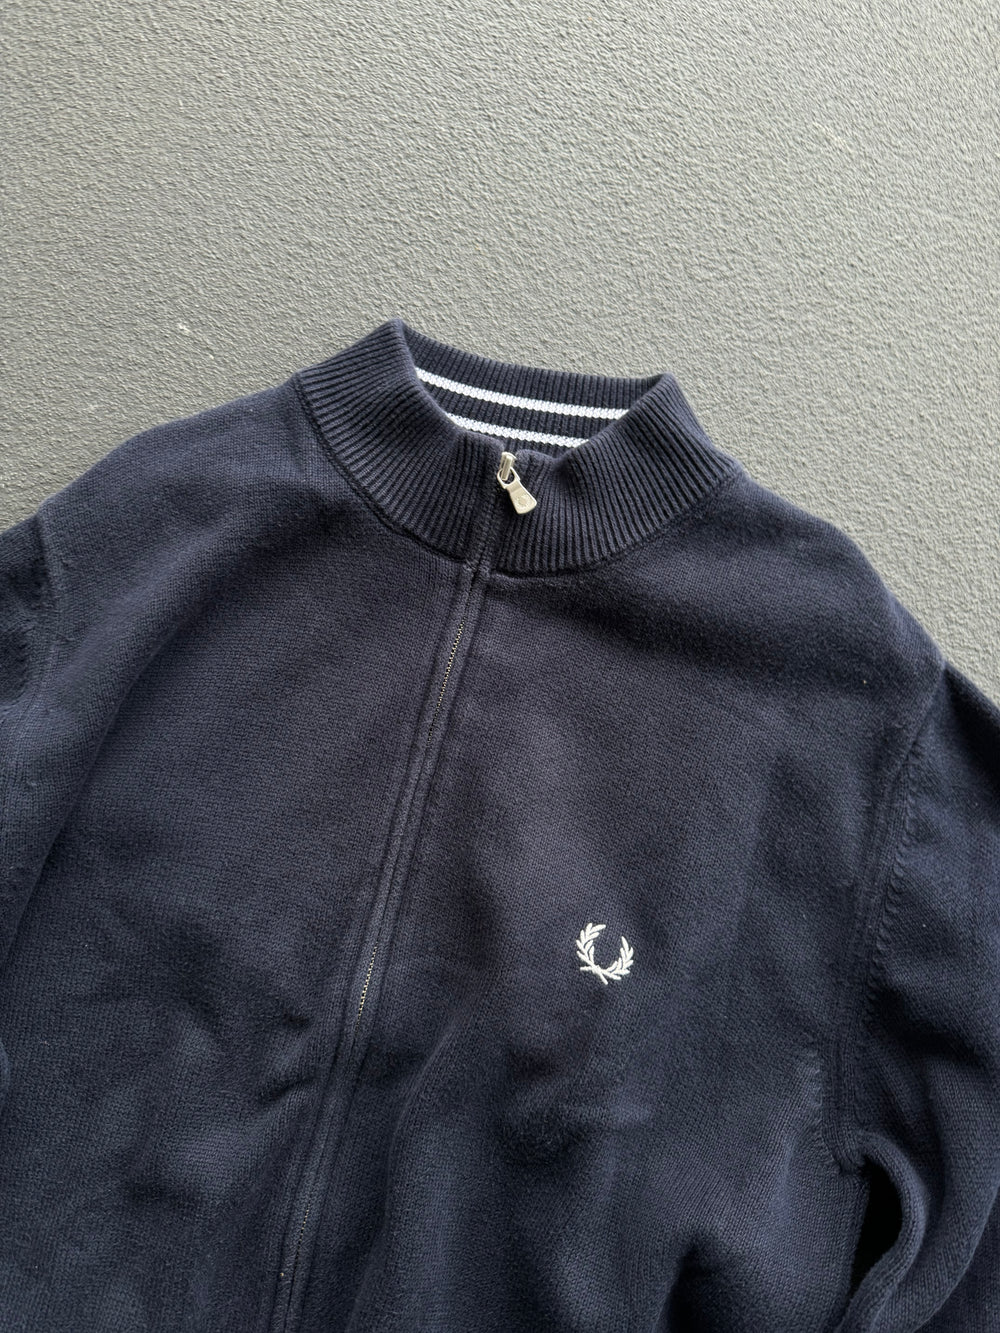 Early 2000s Fred Perry Knit Sweat Jacket (L)